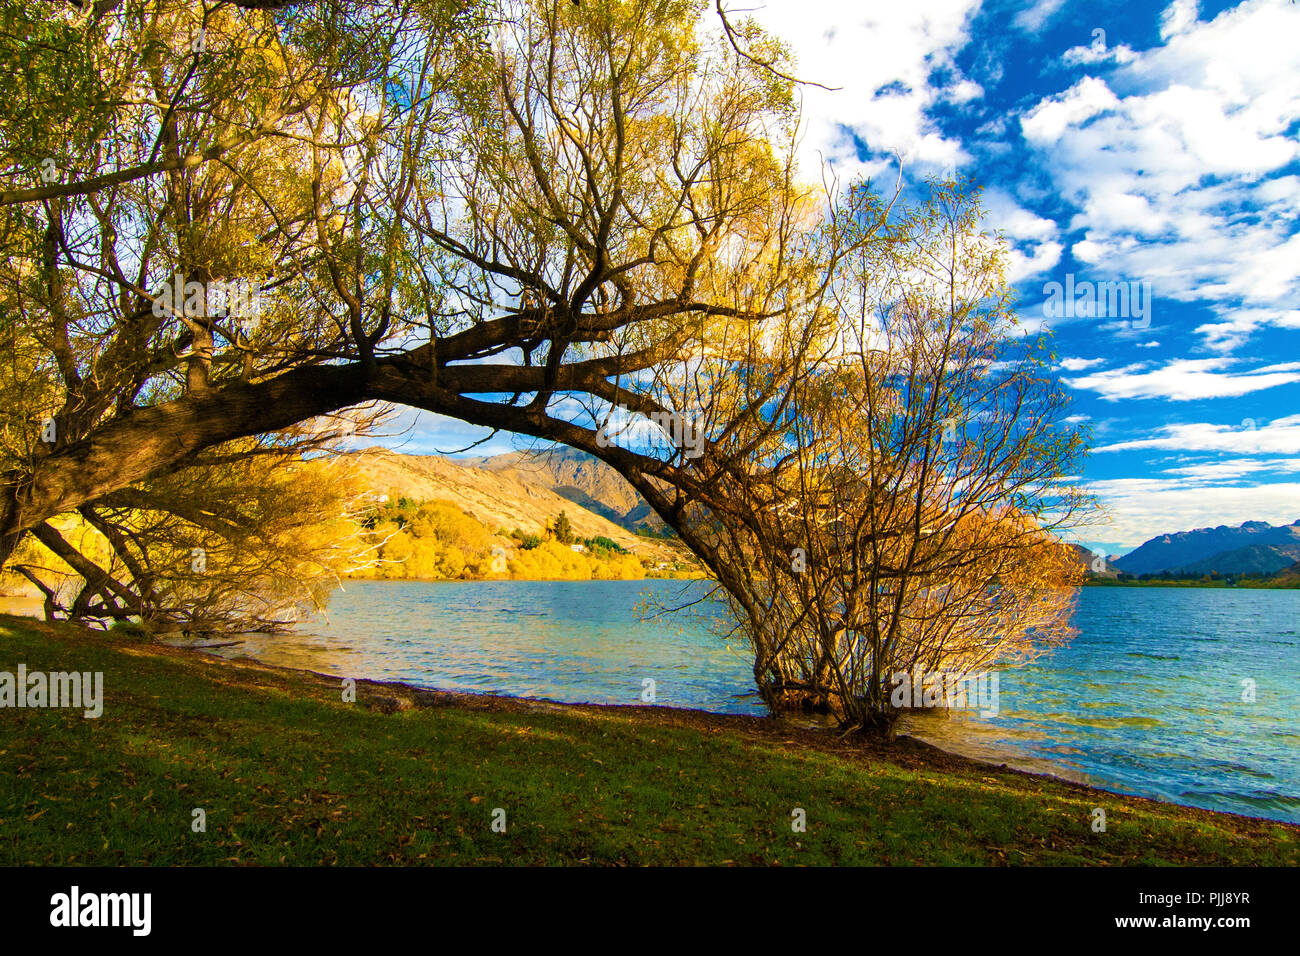 Autumn landscape colourful scenery with trees, lake and golden hills of Central Otago region, Lake Hayes, village Arrowtown, road trip from Queenstown Stock Photo